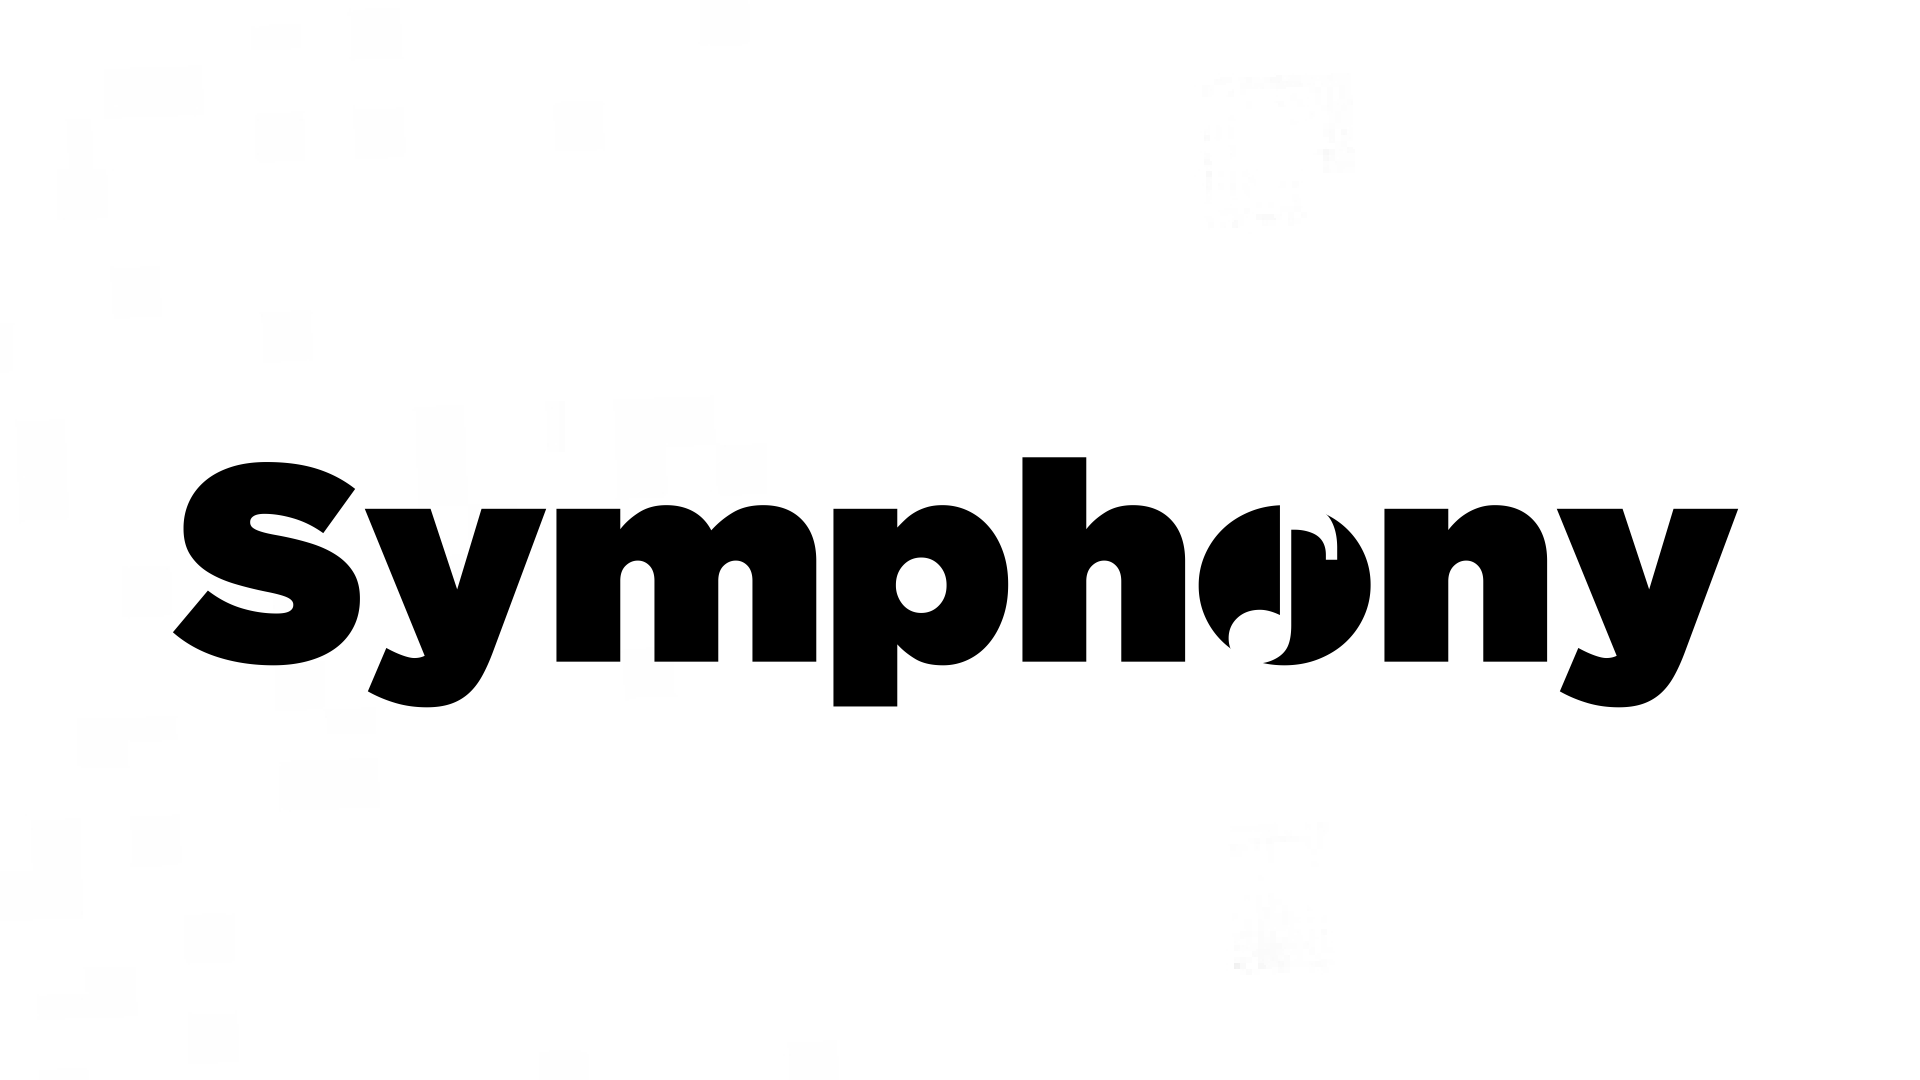 Symphony Buyback 2023 Record Date, Price & Ratio Details | IPO Watch